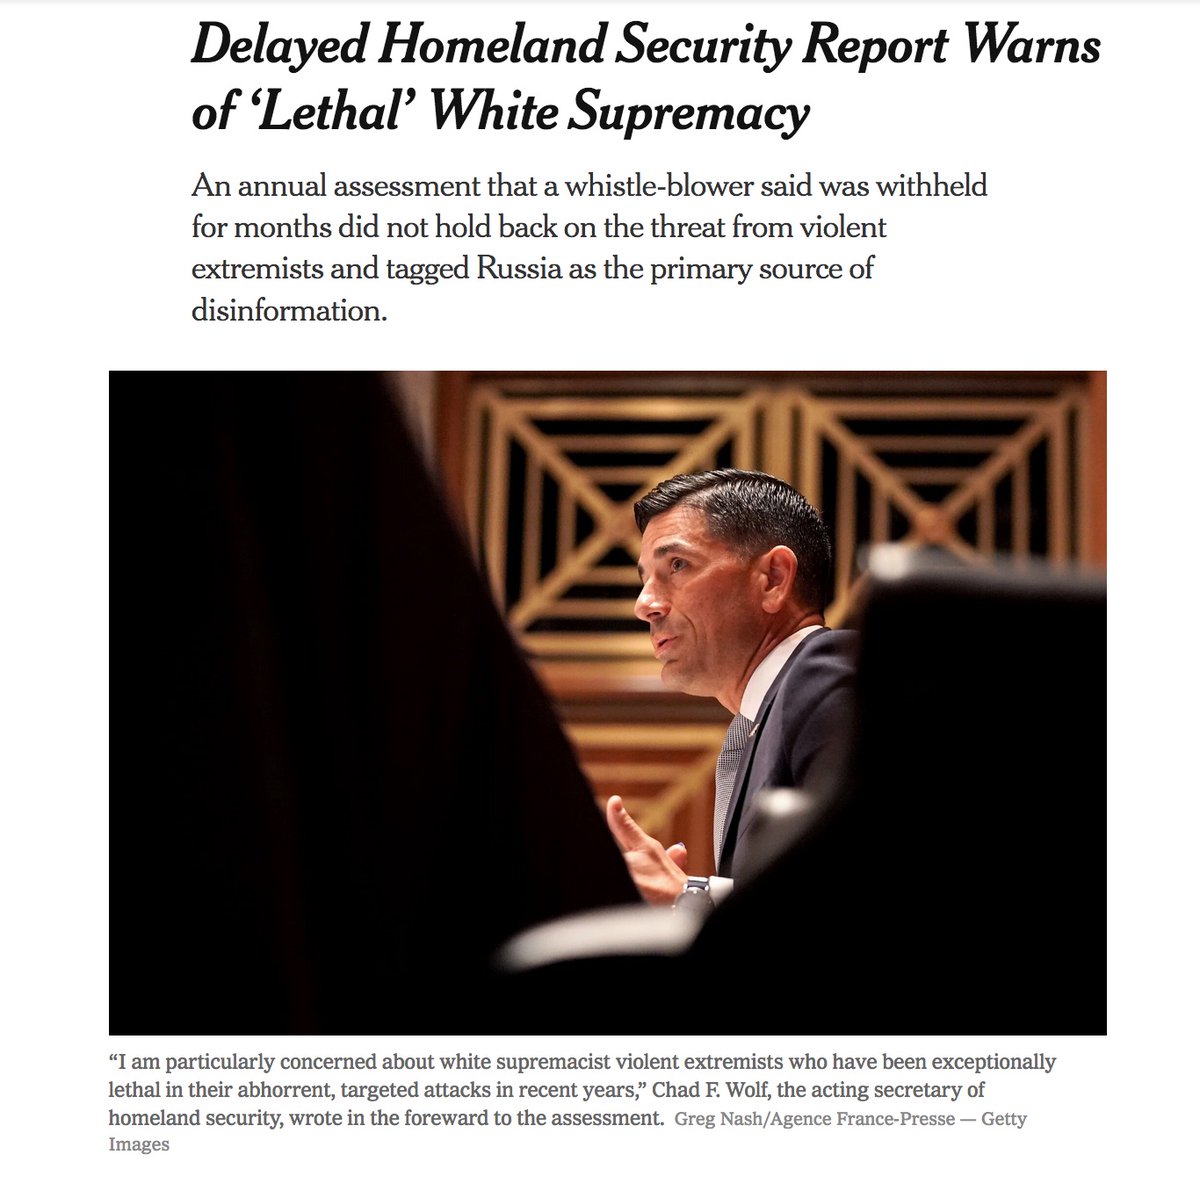 A whistleblower said  @DHSgov withheld this annual assessment for months  https://www.scribd.com/document/478854475/DHS-Homeland-Threat-Assessment which warns white supremacy is the “most persistent & lethal threat" in the US, & names Russia as the primary source of disinformation:  https://www.nytimes.com/2020/10/06/us/politics/homeland-security-white-supremacists-russia.html(DHS can't say POTUS is)